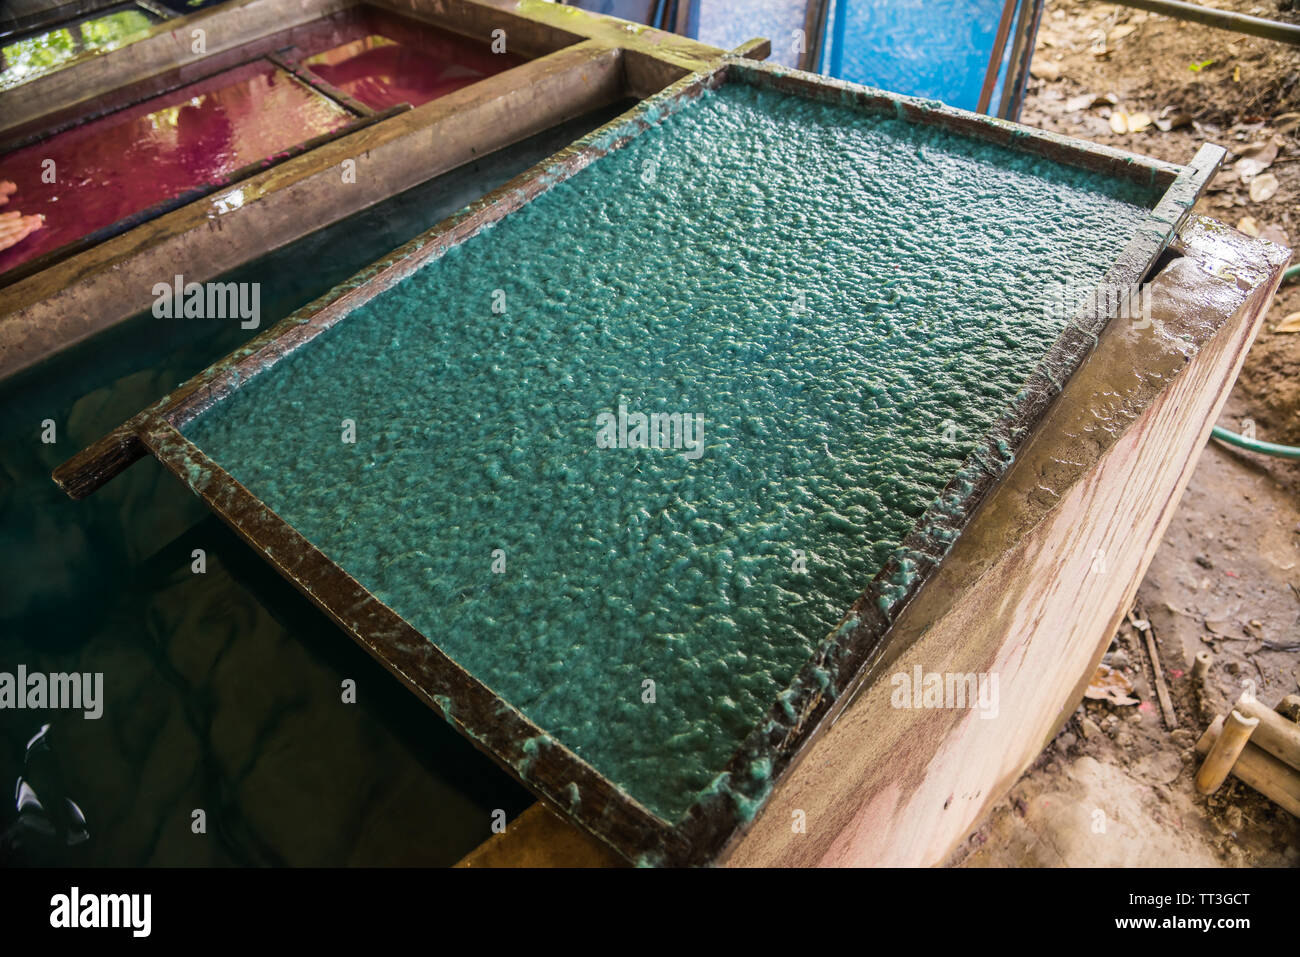 Handmade paper from elephant poo is set out to dry Stock Photo